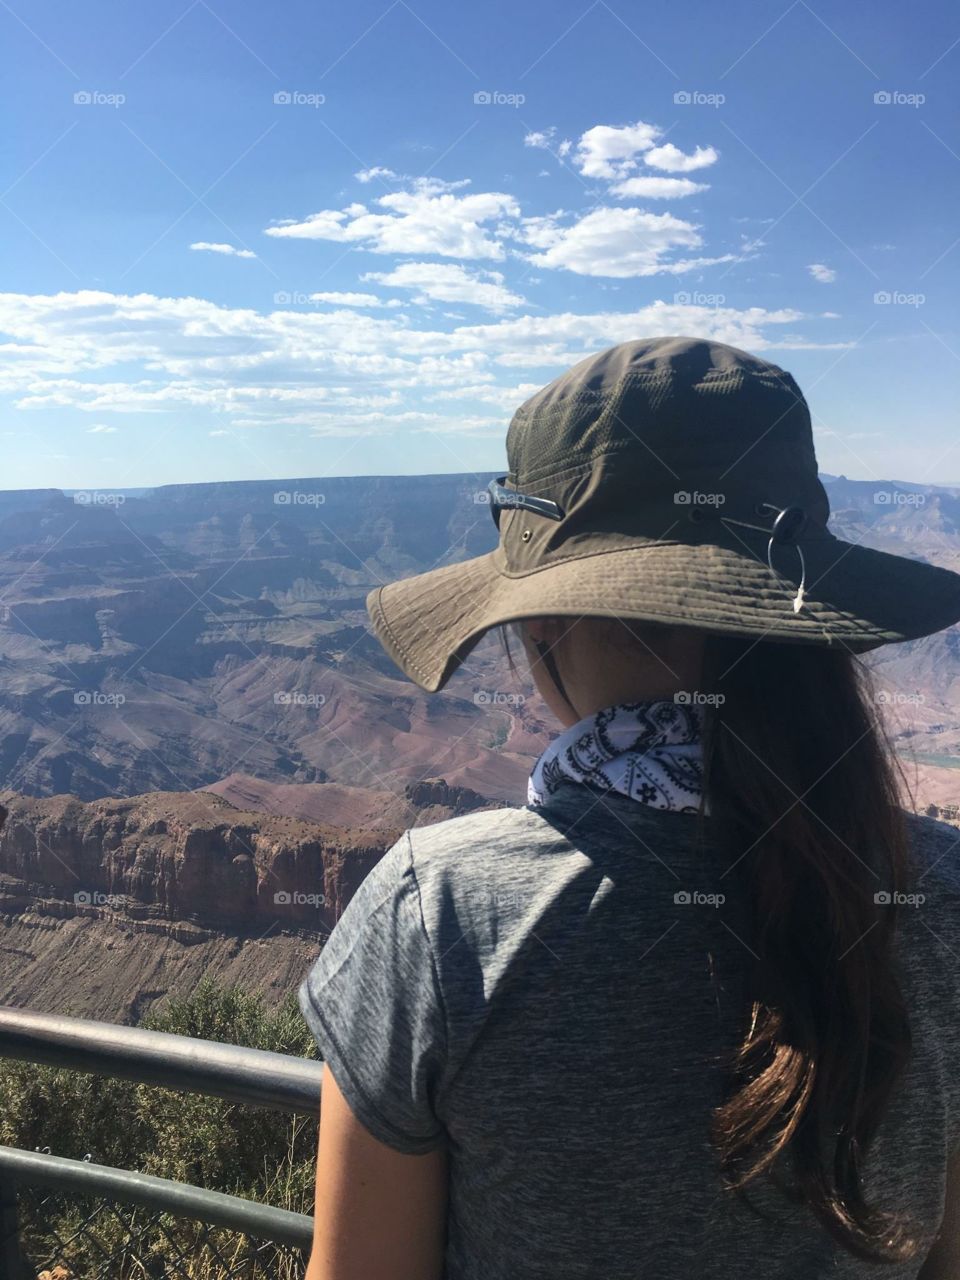 Gazing down into the Grand Canyon, taking in the awe and wonder of the spectacular scenery. 